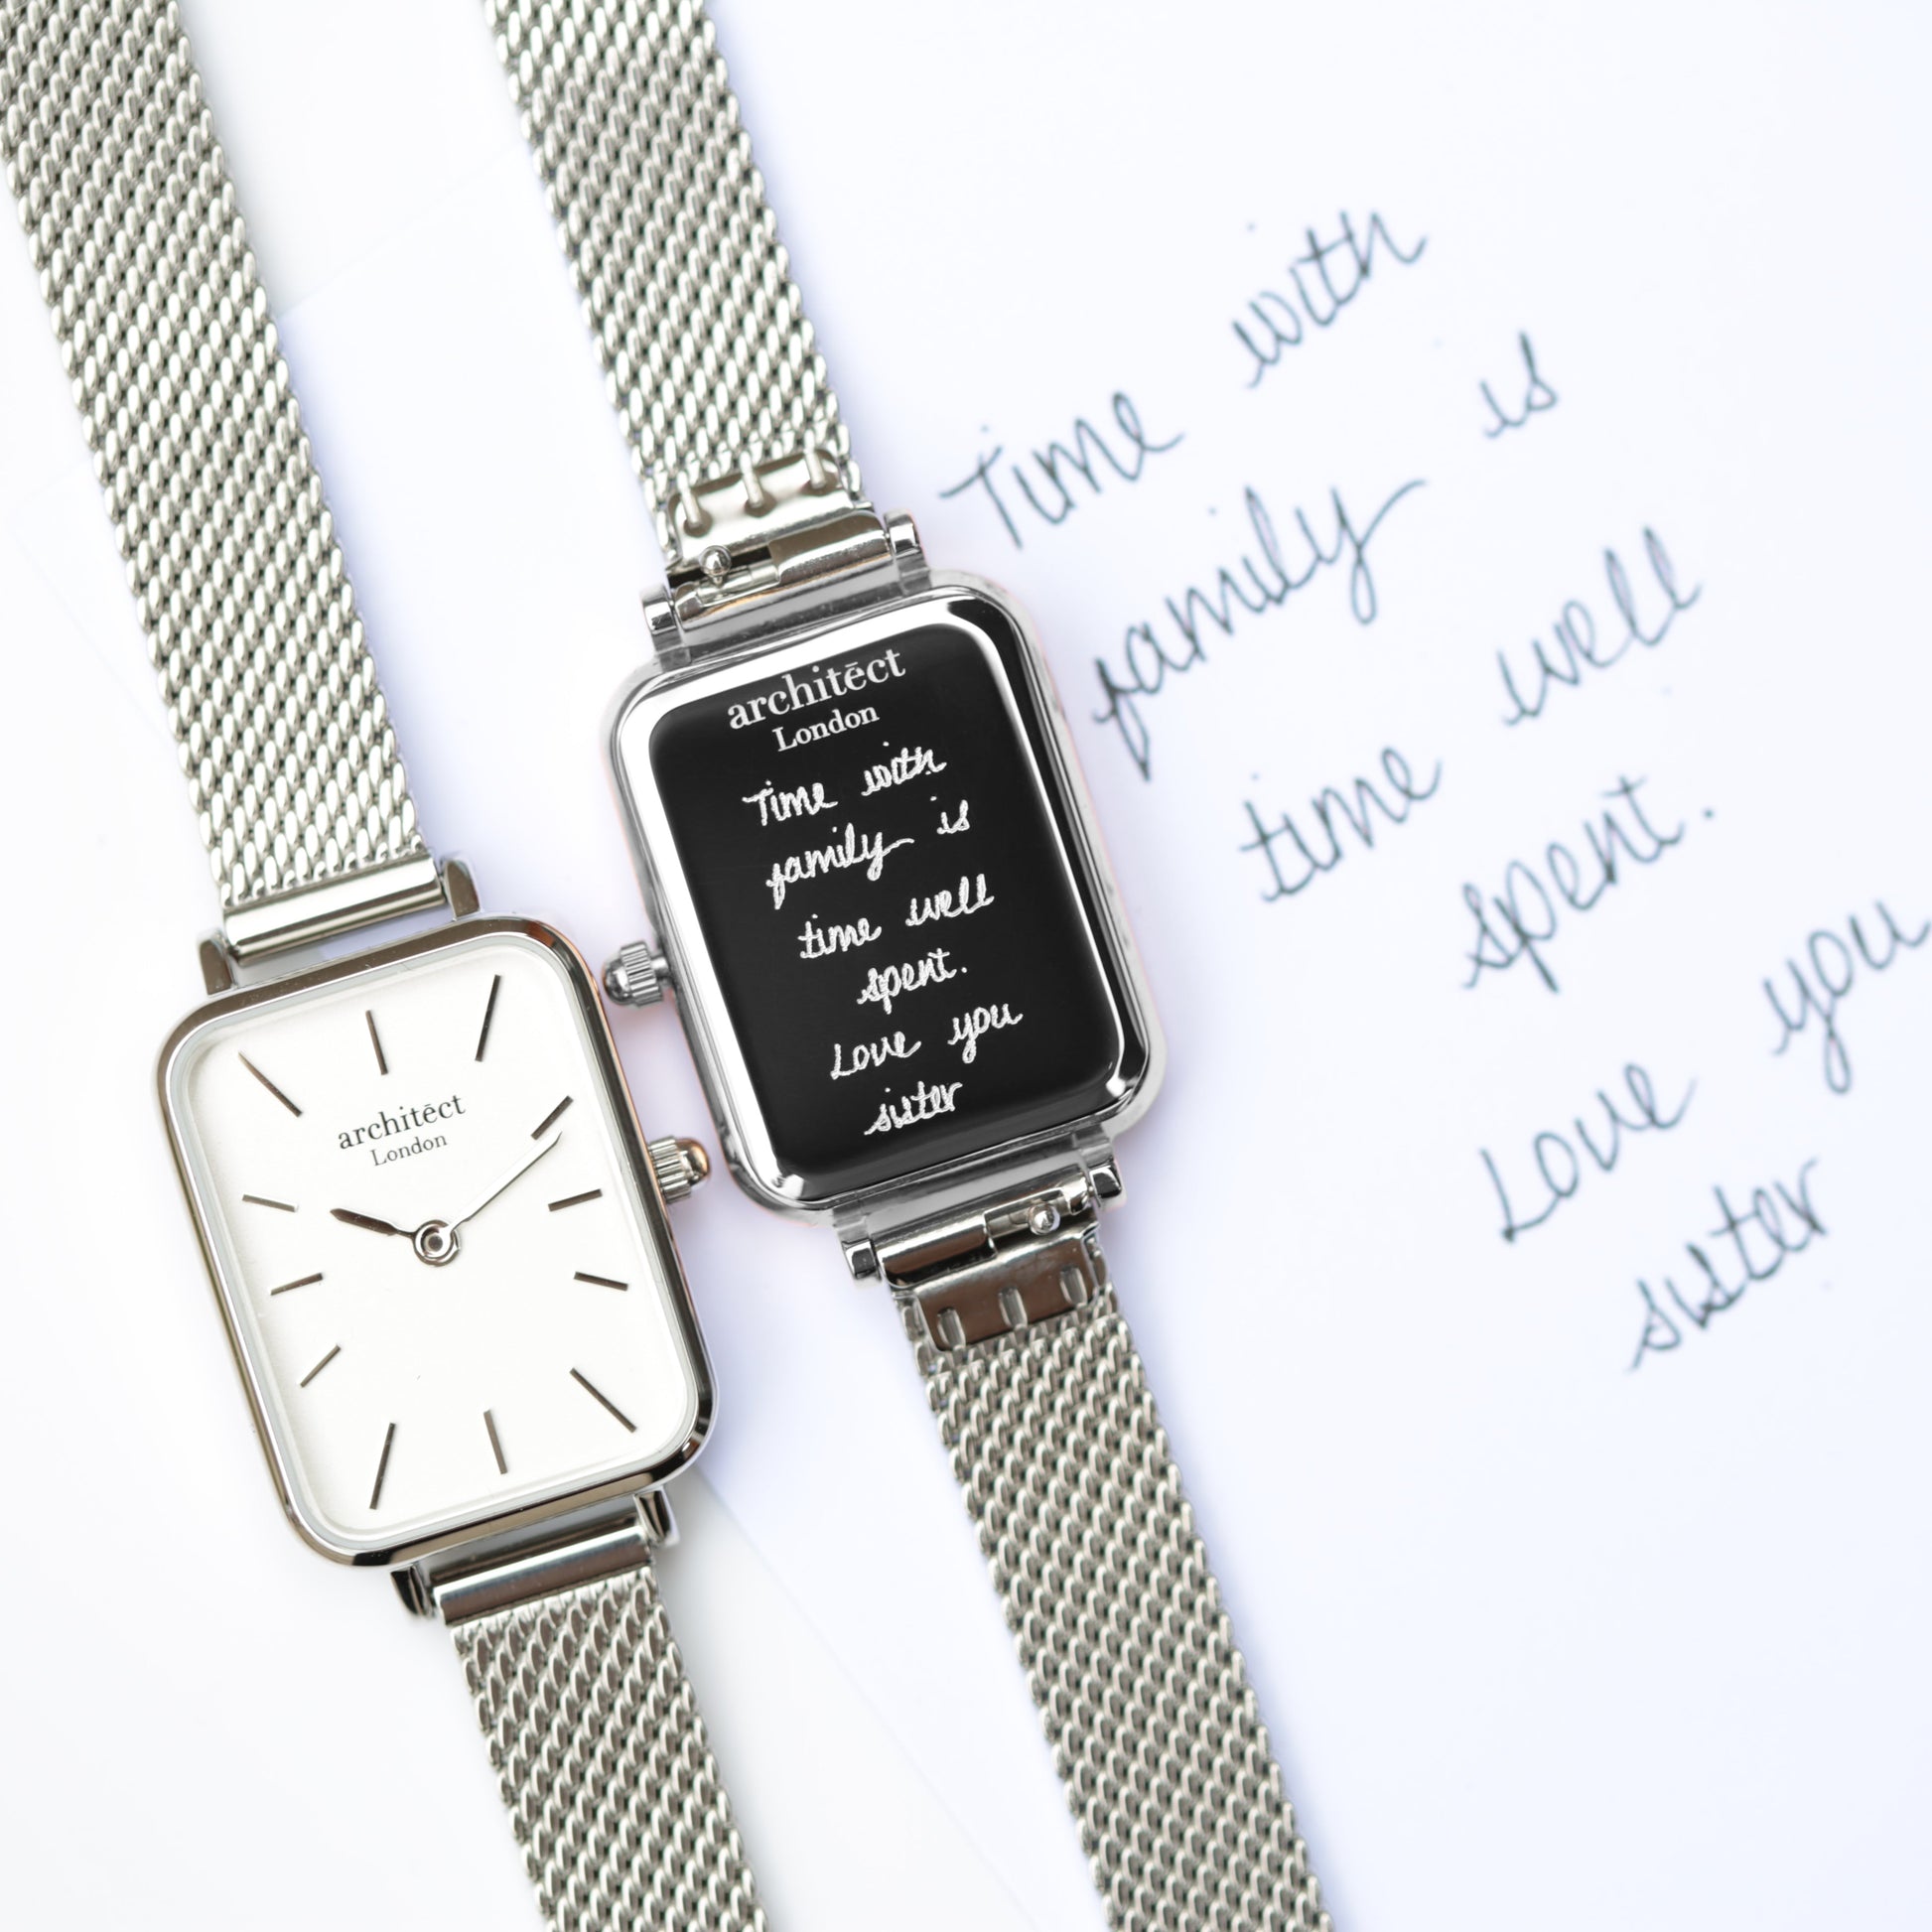 Personalized Ladies' Watches - Handwriting Engraved Watch In Cloud Silver 